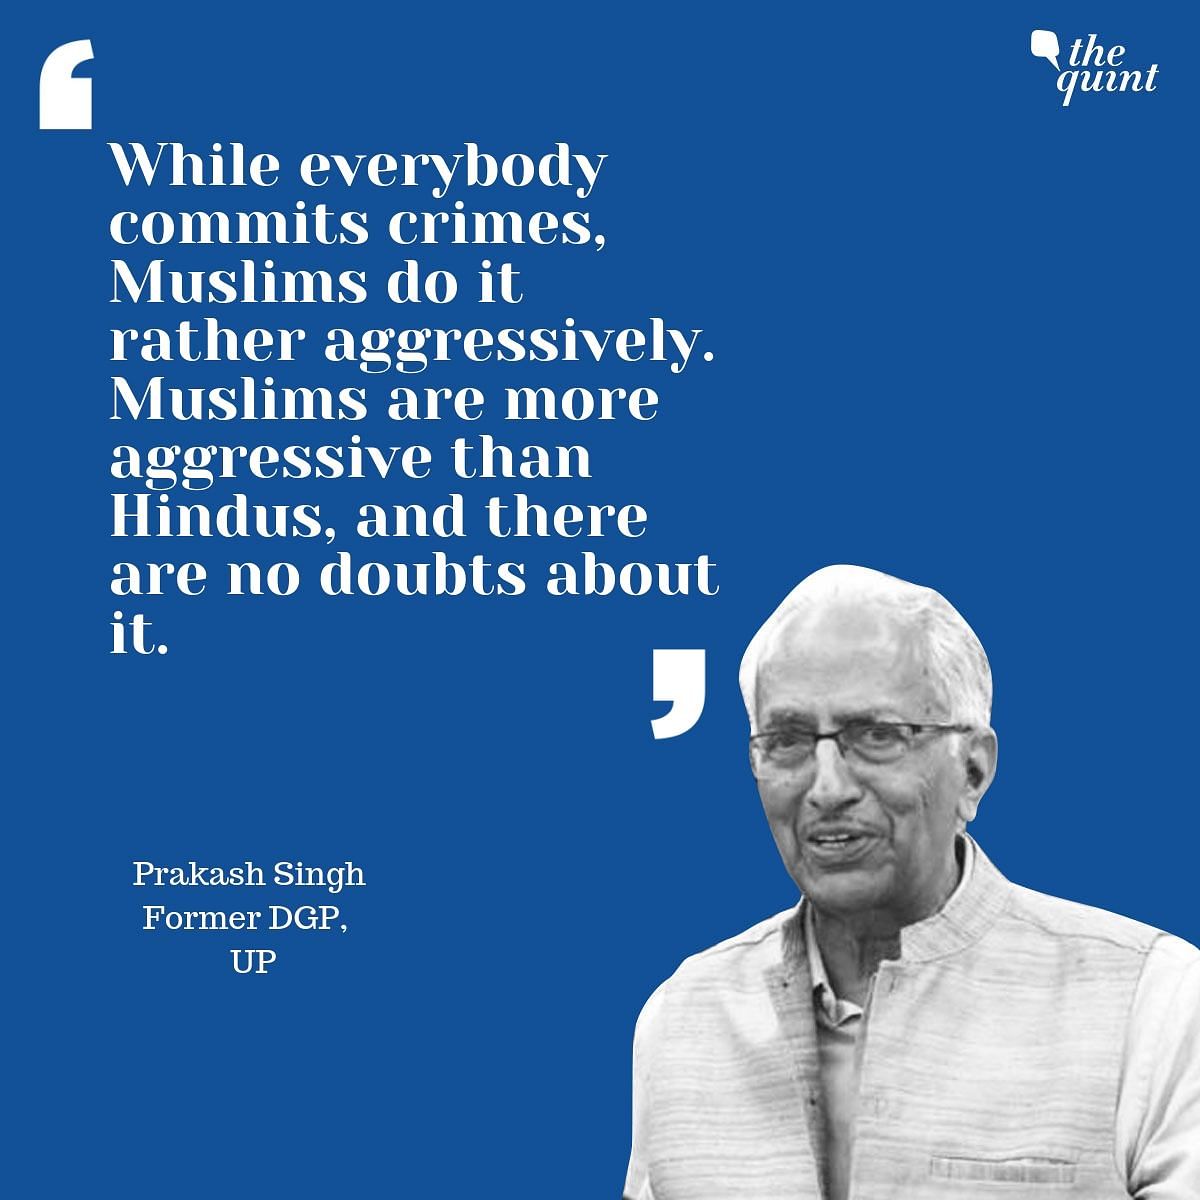 In Uttar Pradesh, 56 percent of the police force believes that Muslims are more prone to committing criminal acts.